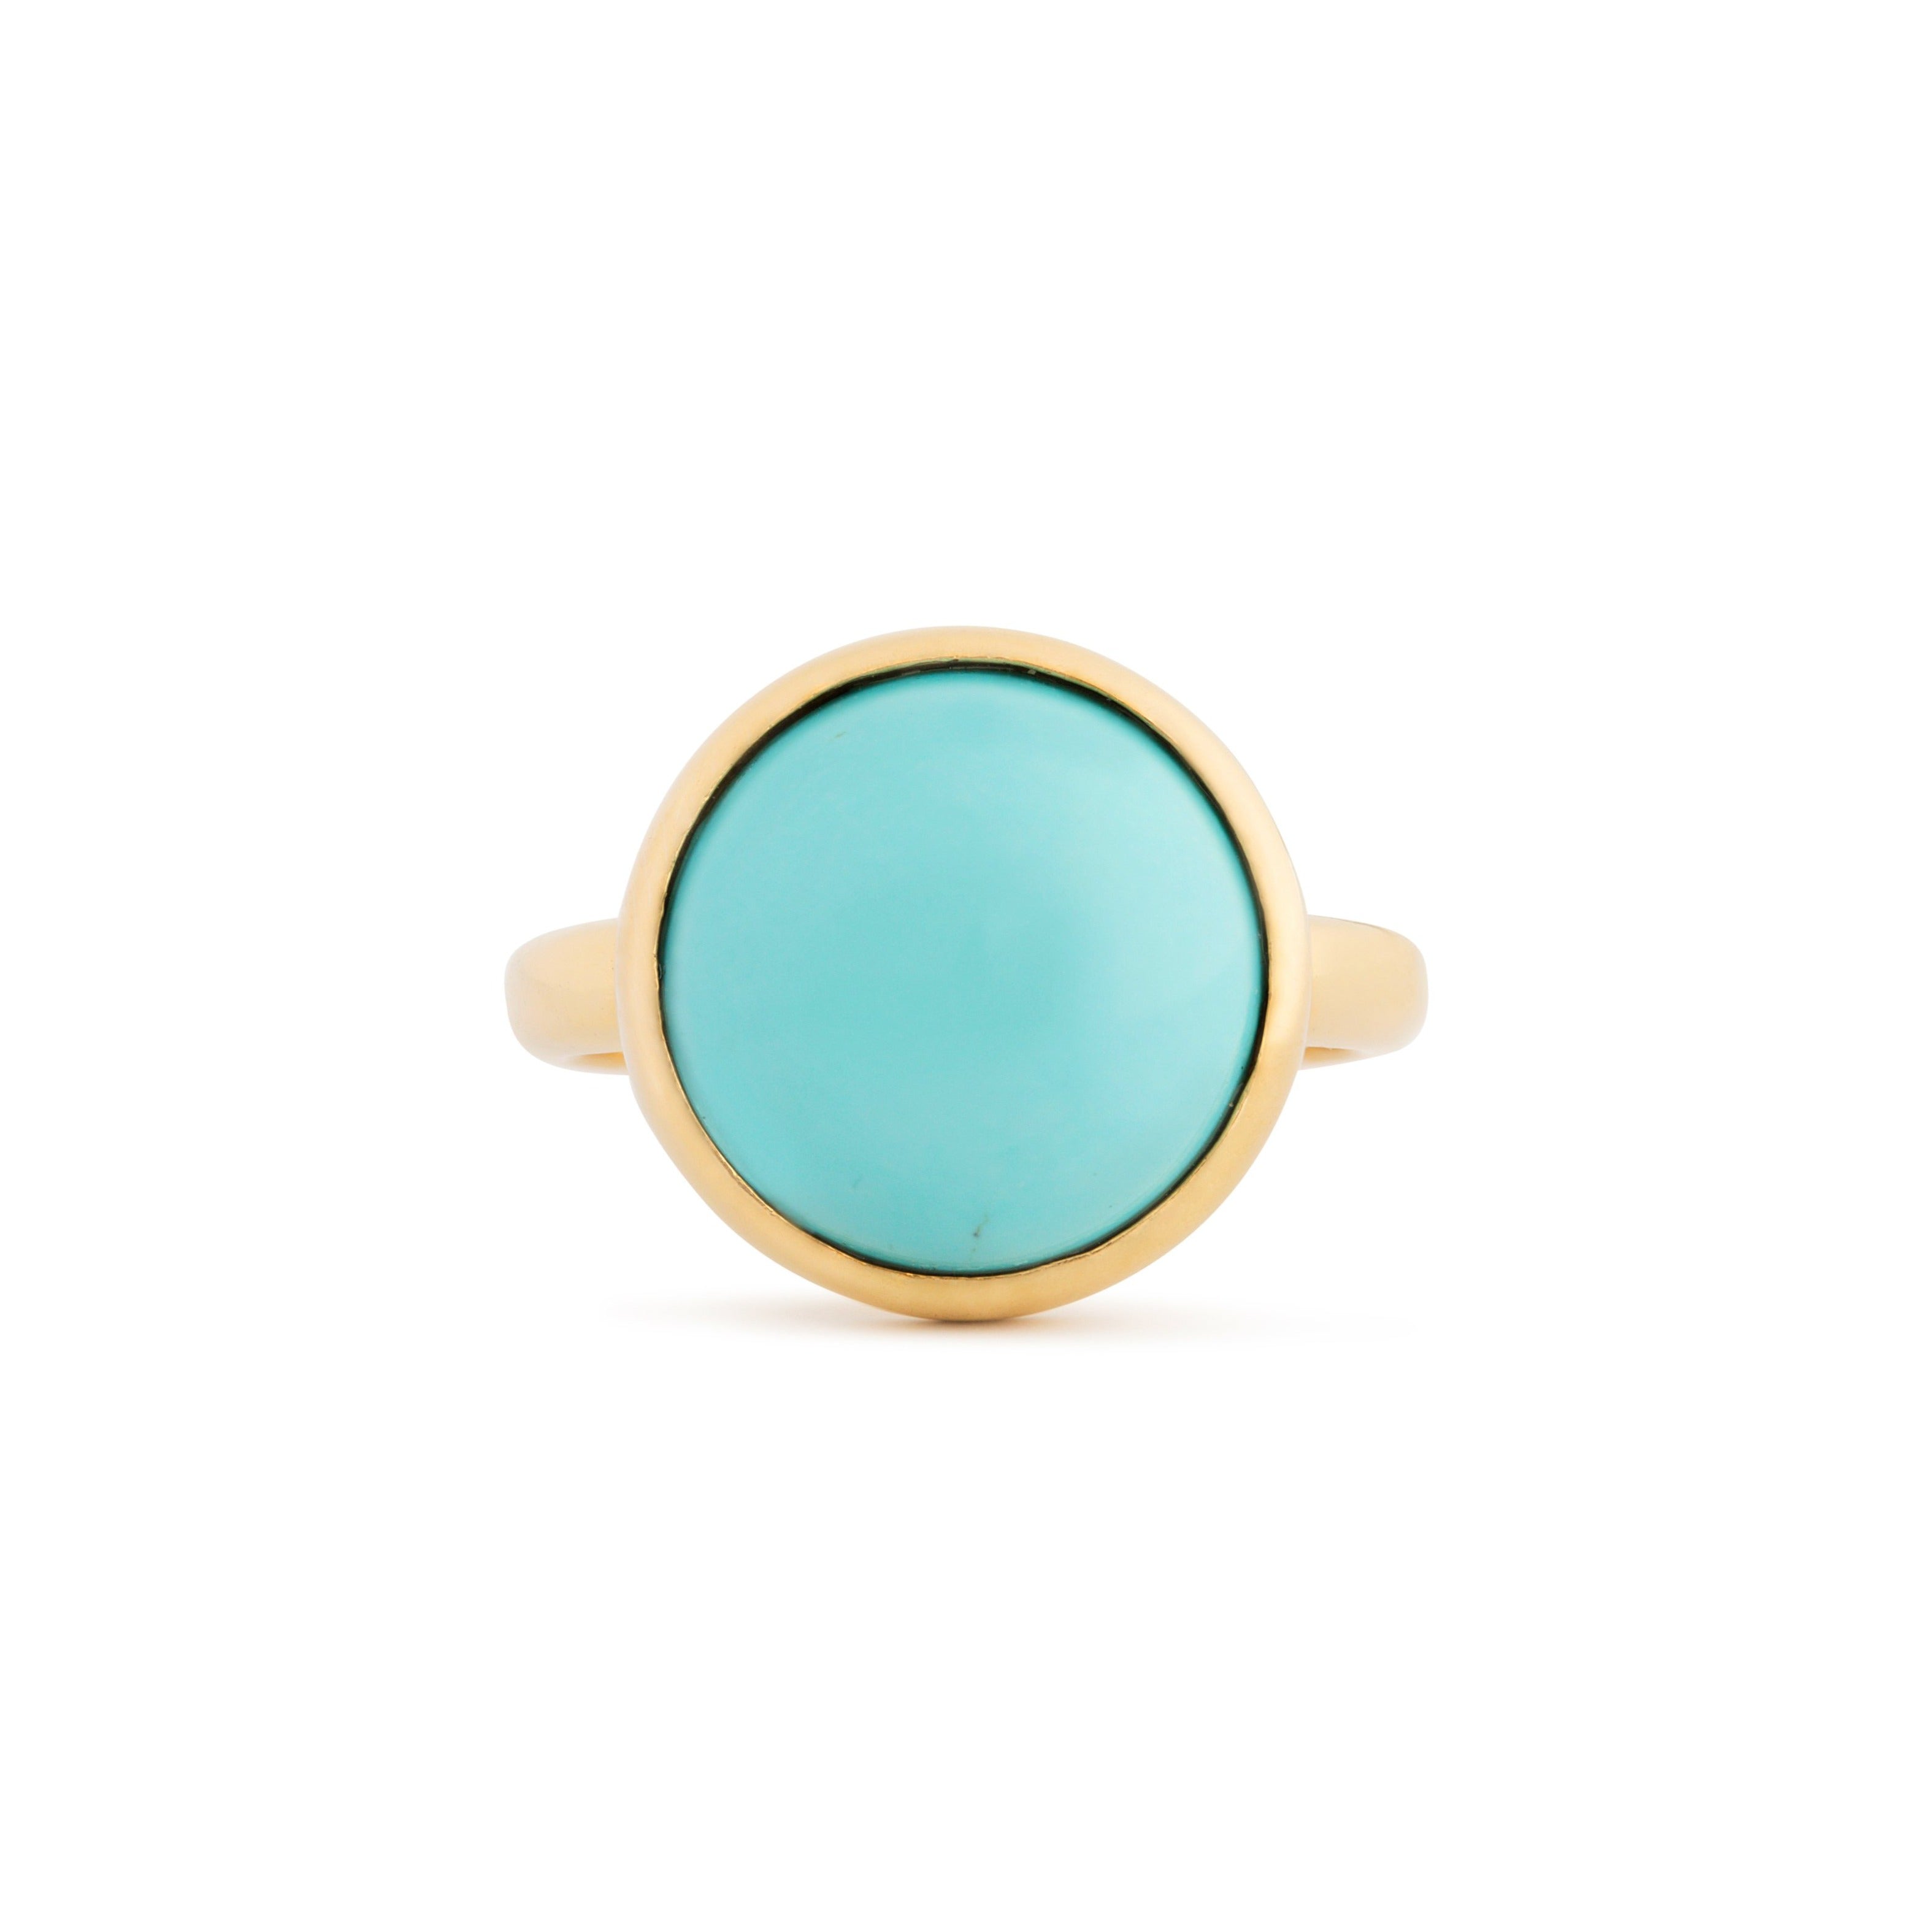 The F&B Turquoise and 14k Gold Ring